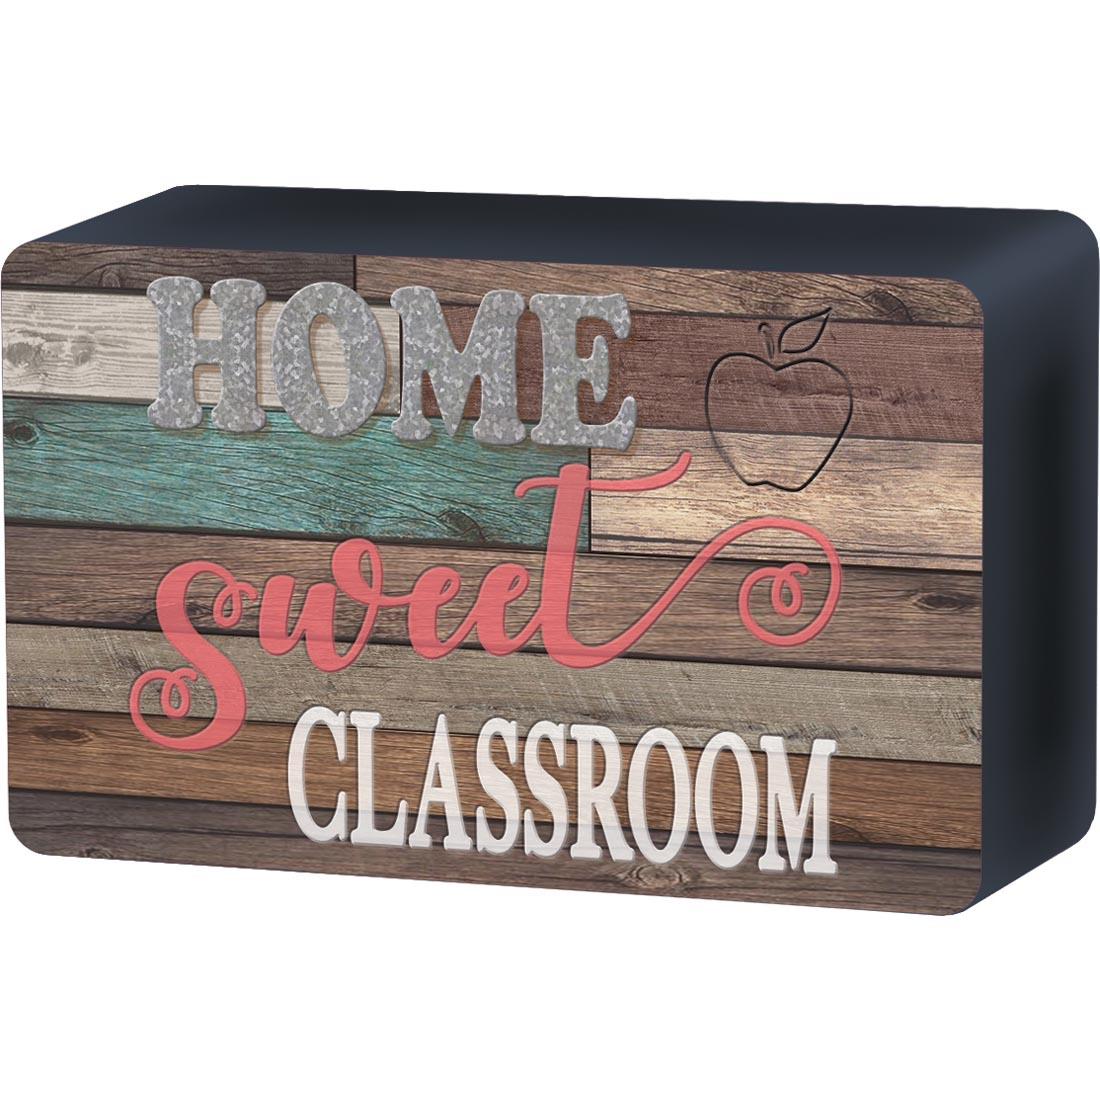 Magnetic Whiteboard Eraser from the Home Sweet Classroom collection by Teacher Created Resources